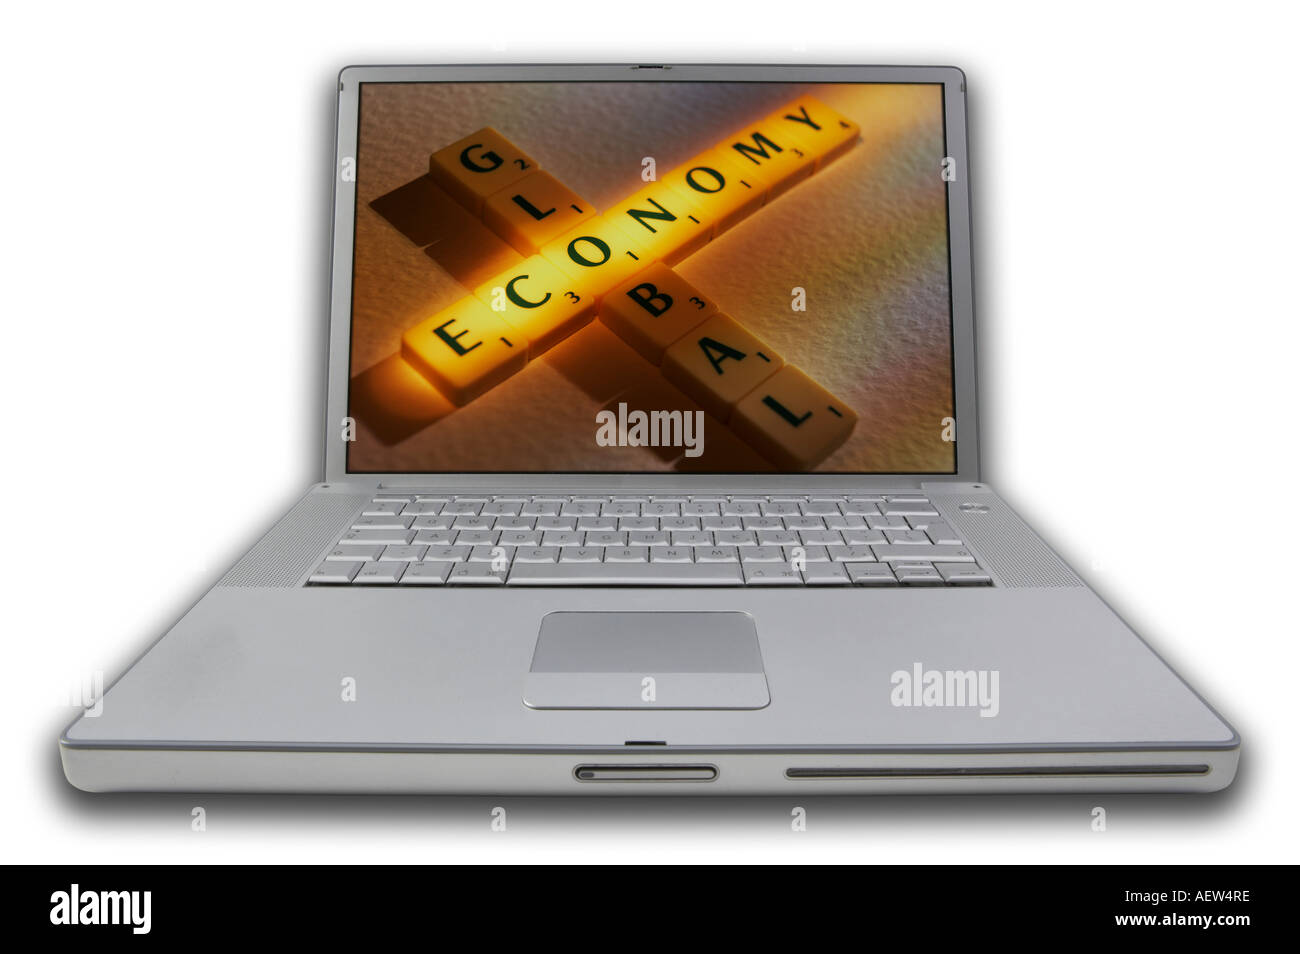 LAP TOP COMPUTER WITH SCRABBLE LETTERS ON SCREEN SPELLING WORDS GLOBAL ECONOMY Stock Photo